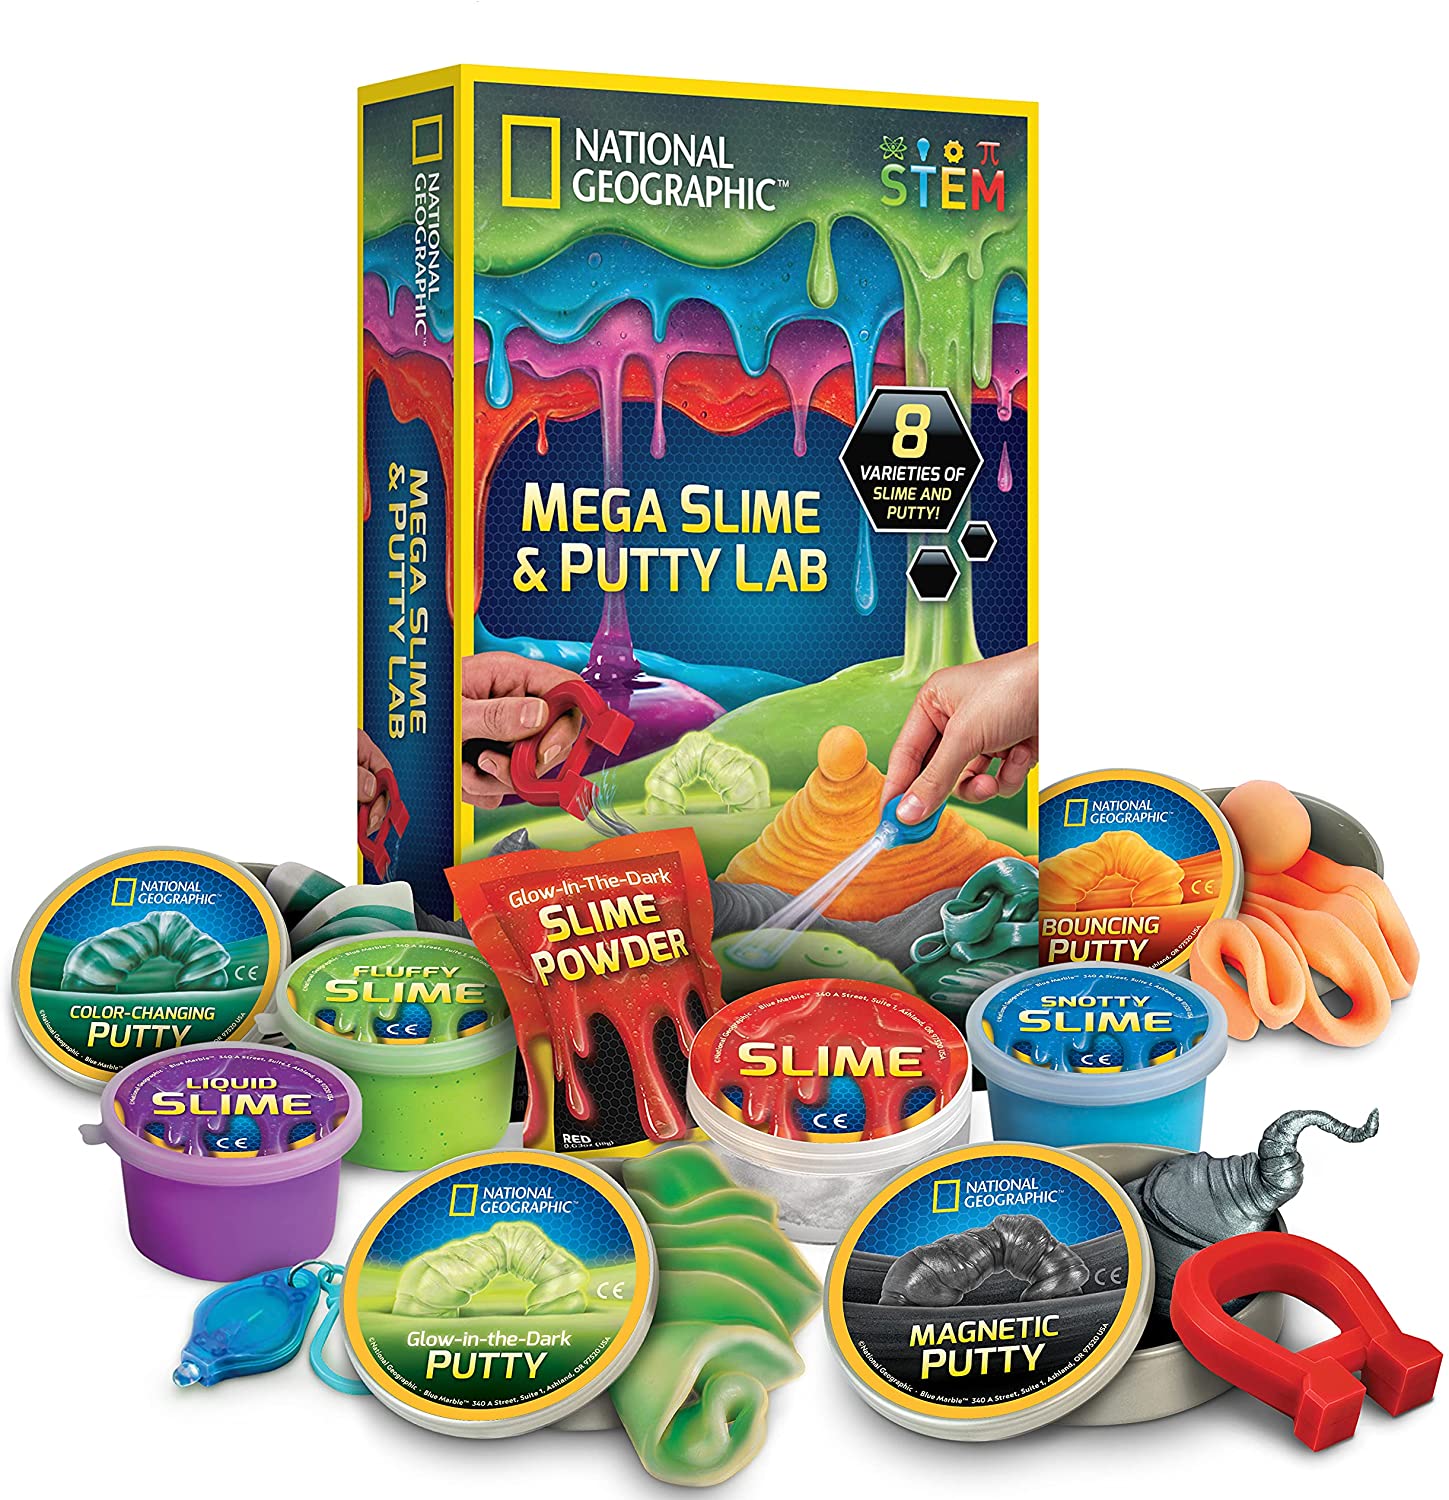 NATIONAL GEOGRAPHIC Magnetic Putty & Slime Maker